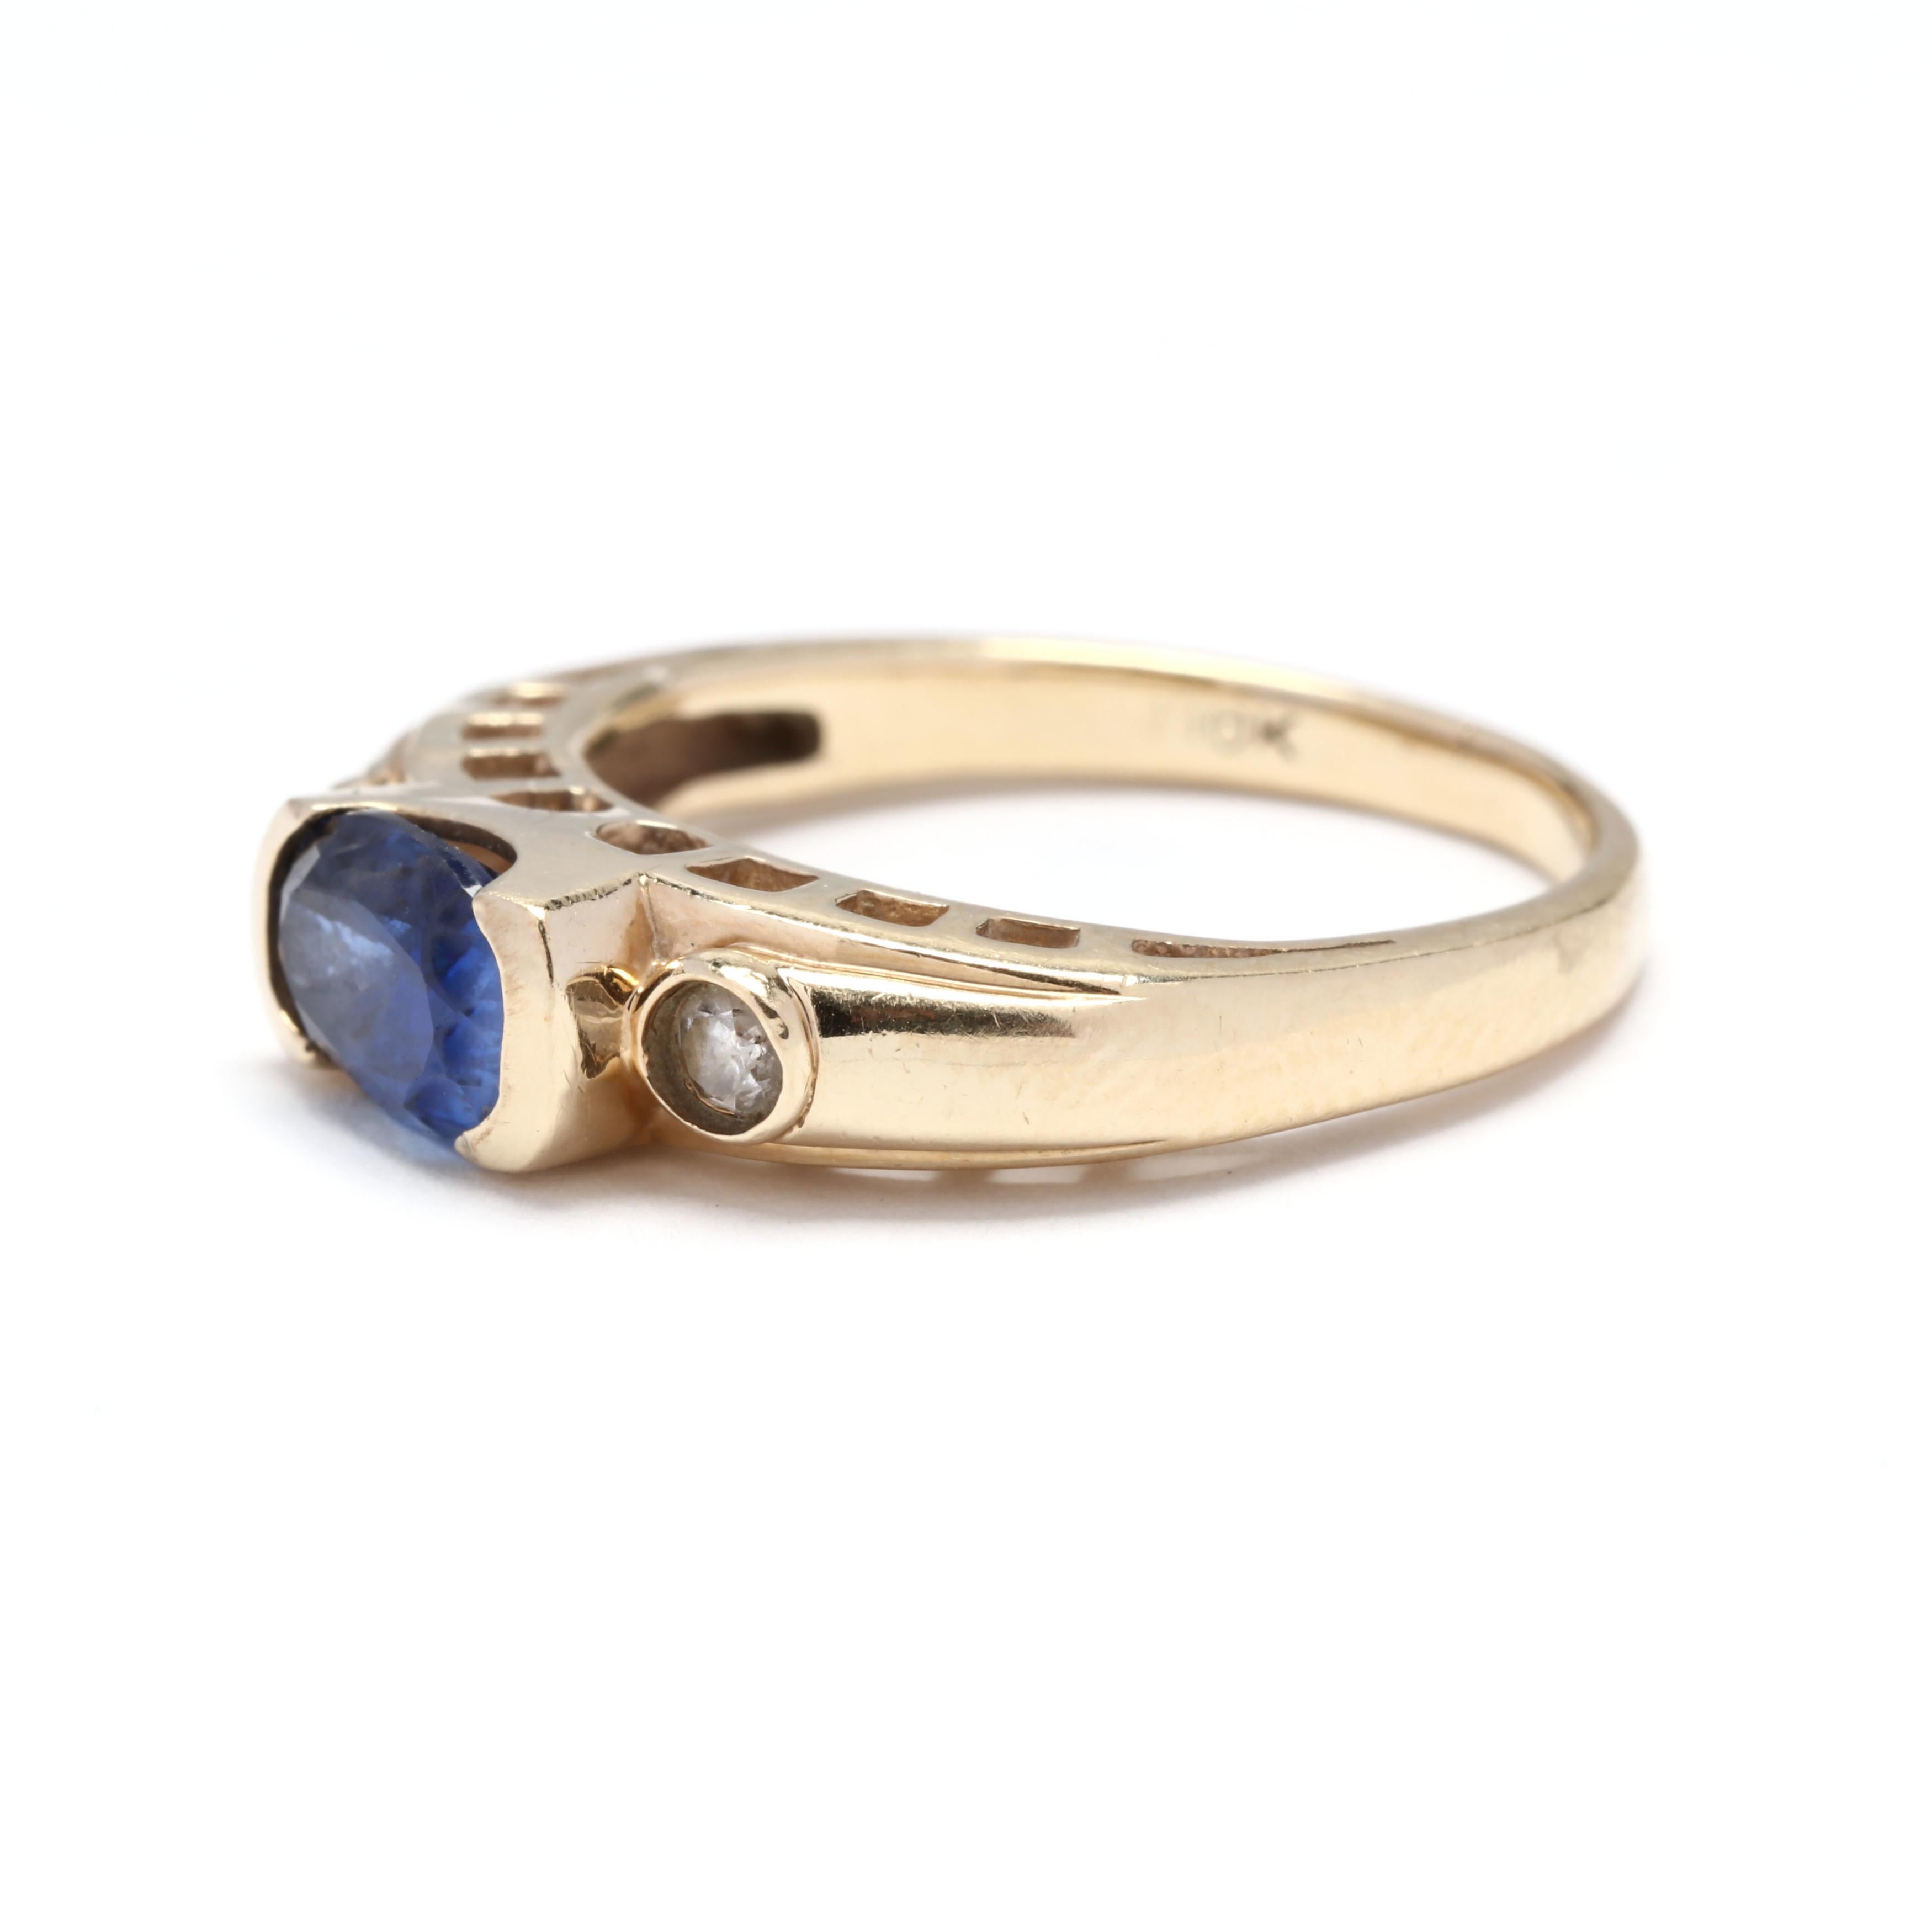 10k gold sapphire and diamond ring